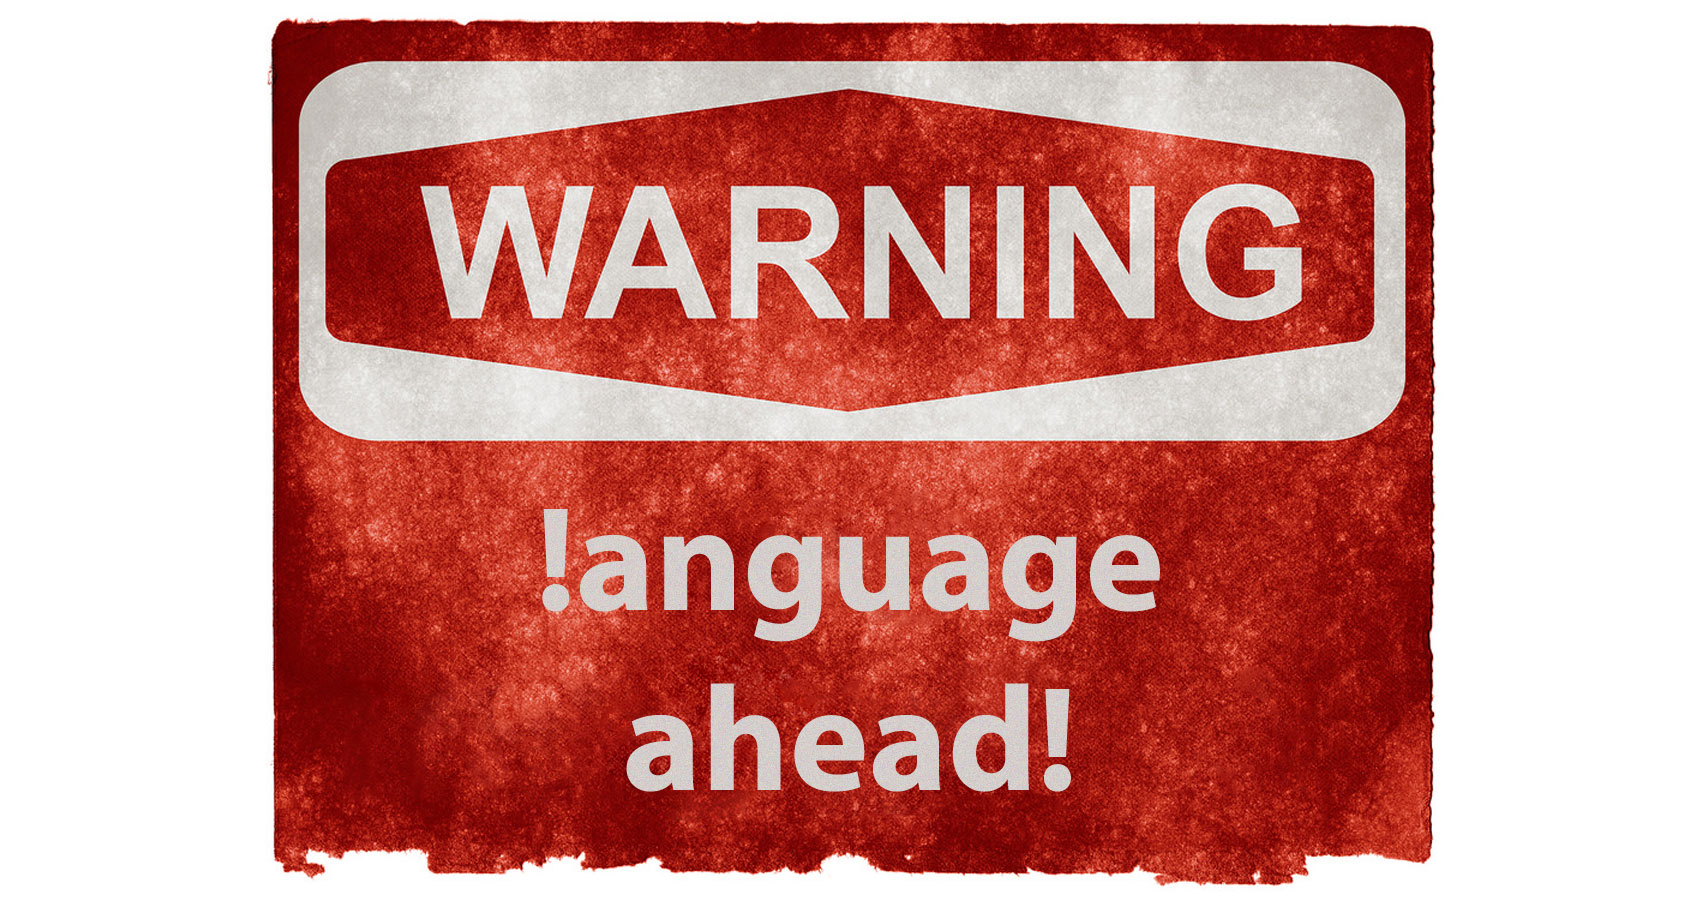 Warning! !anguage Ahead! by J.Ahlberg at Spillwords.com